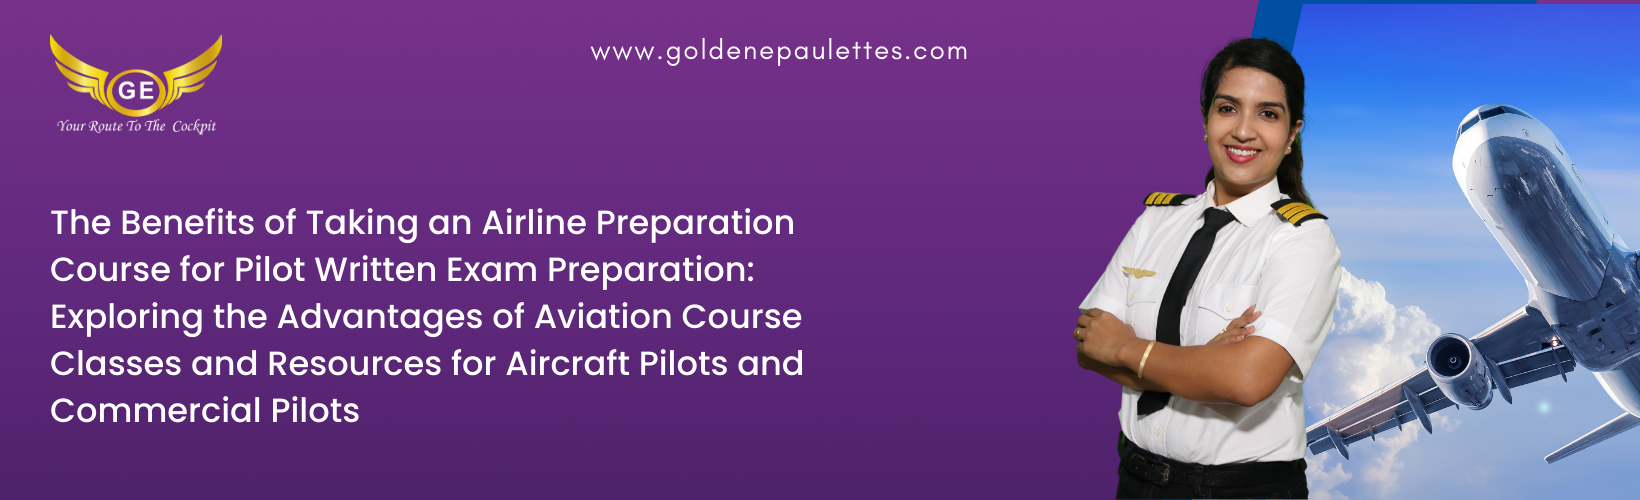 Strategies for Acing a Written Exam at an Airline Preparation Class